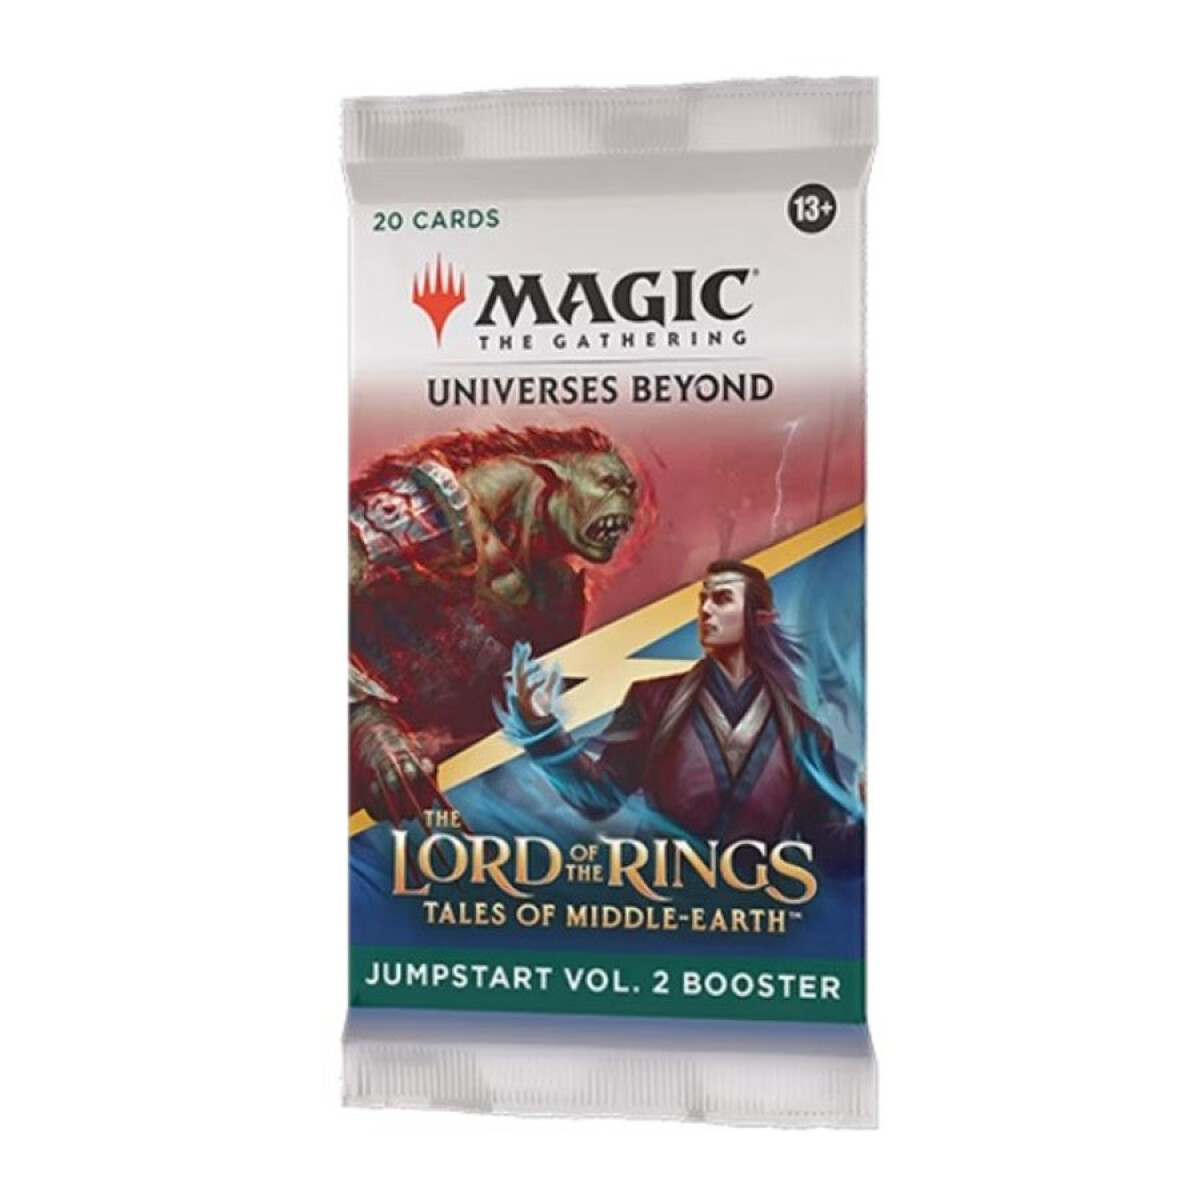 The Lord of The Rings - Jumpstart Vol. 2 Booster [Inglés] 